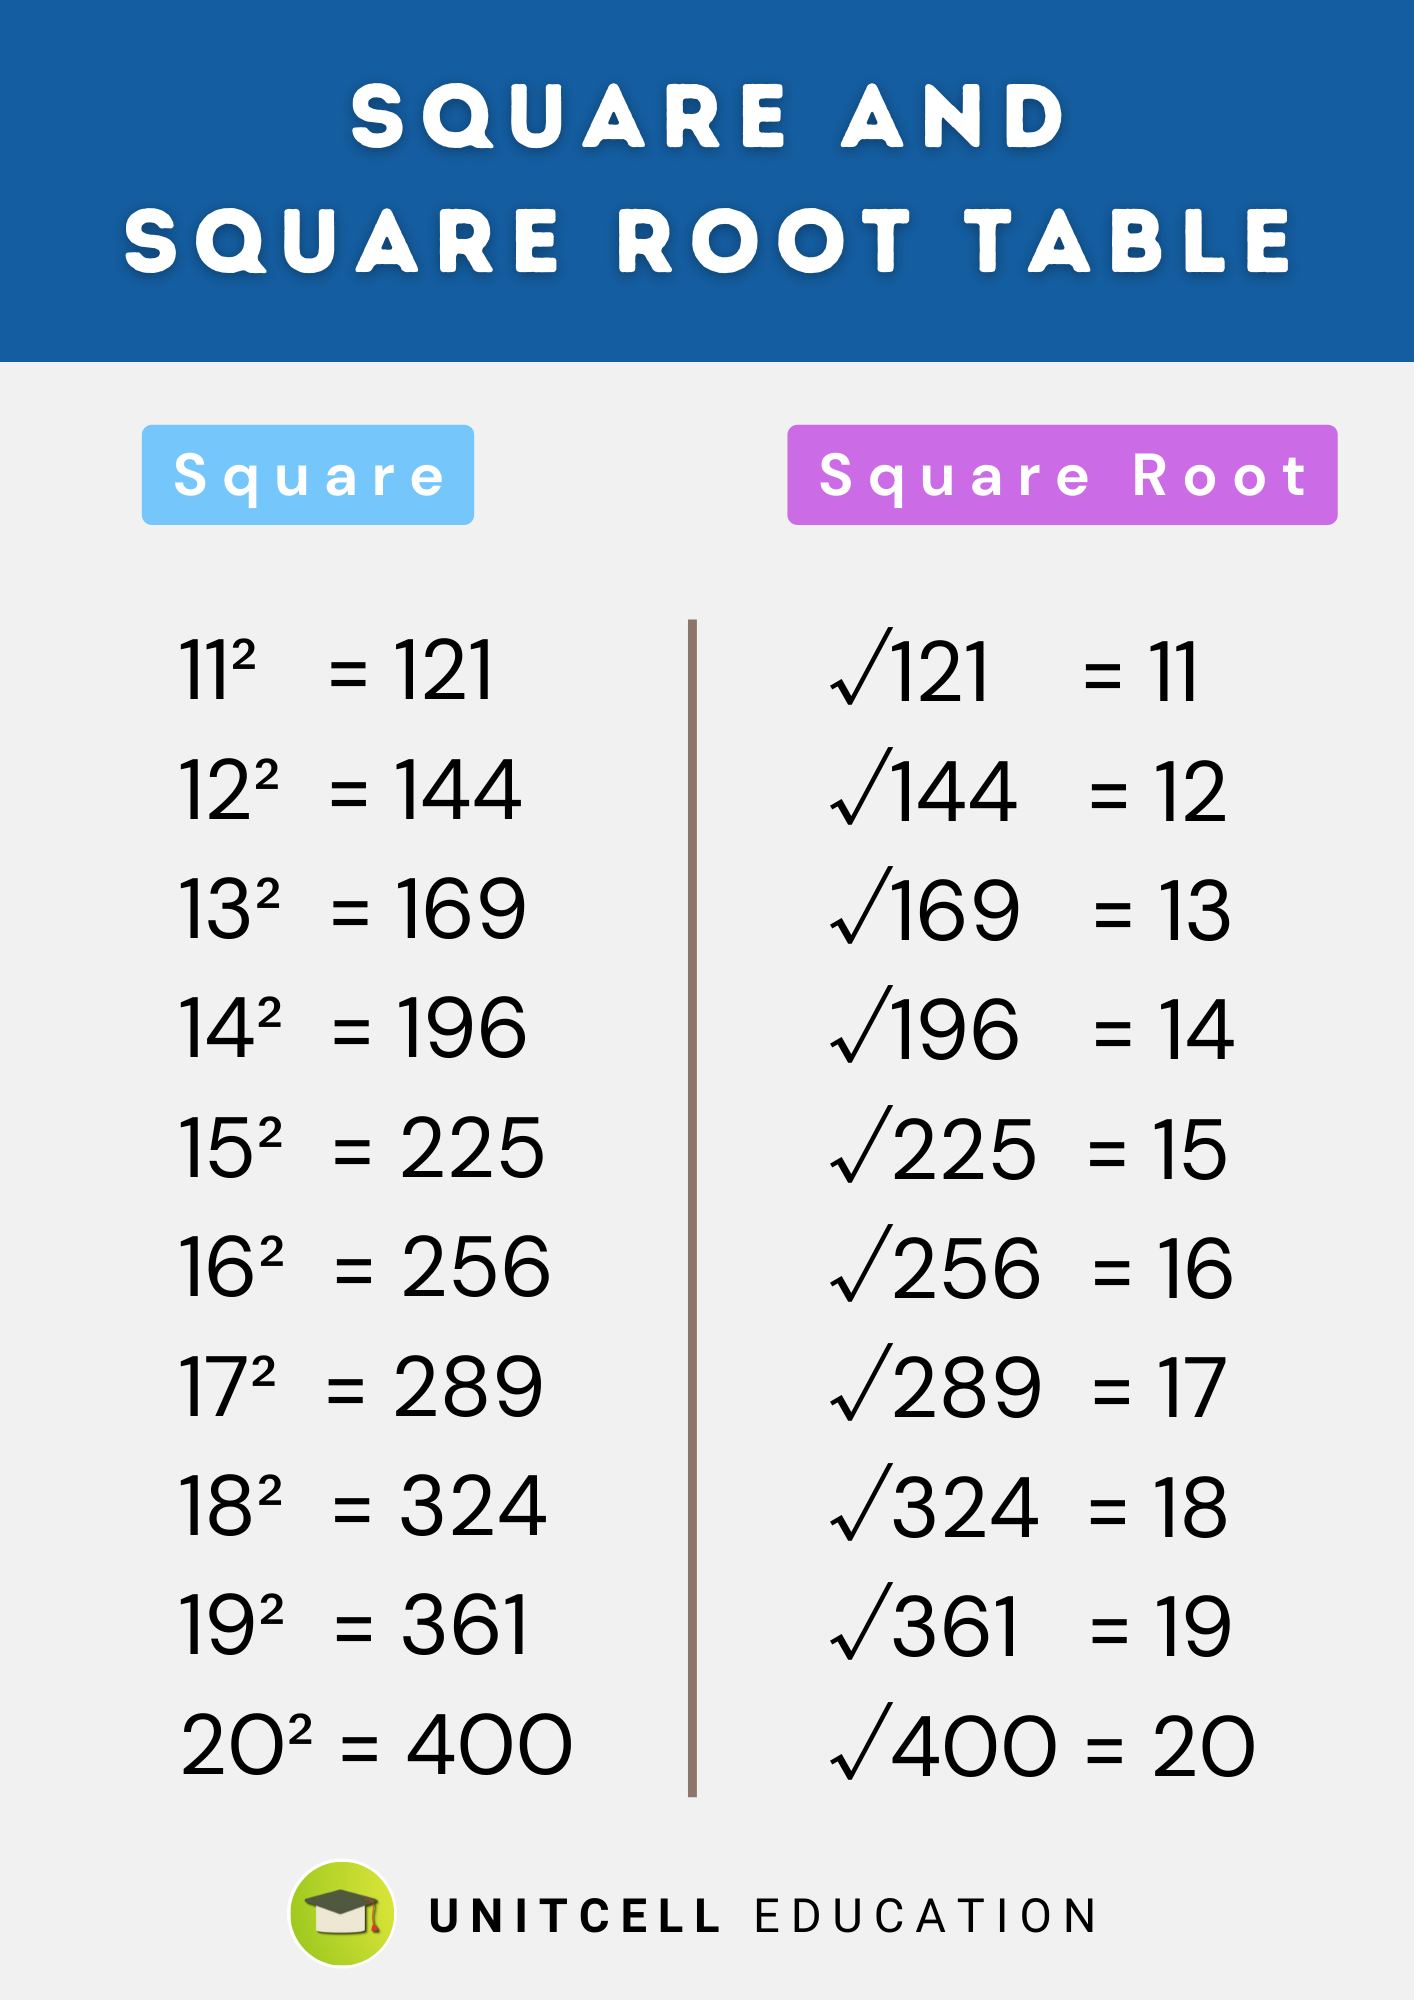 Square and square root table from 11 to 20. printable sheets for students.